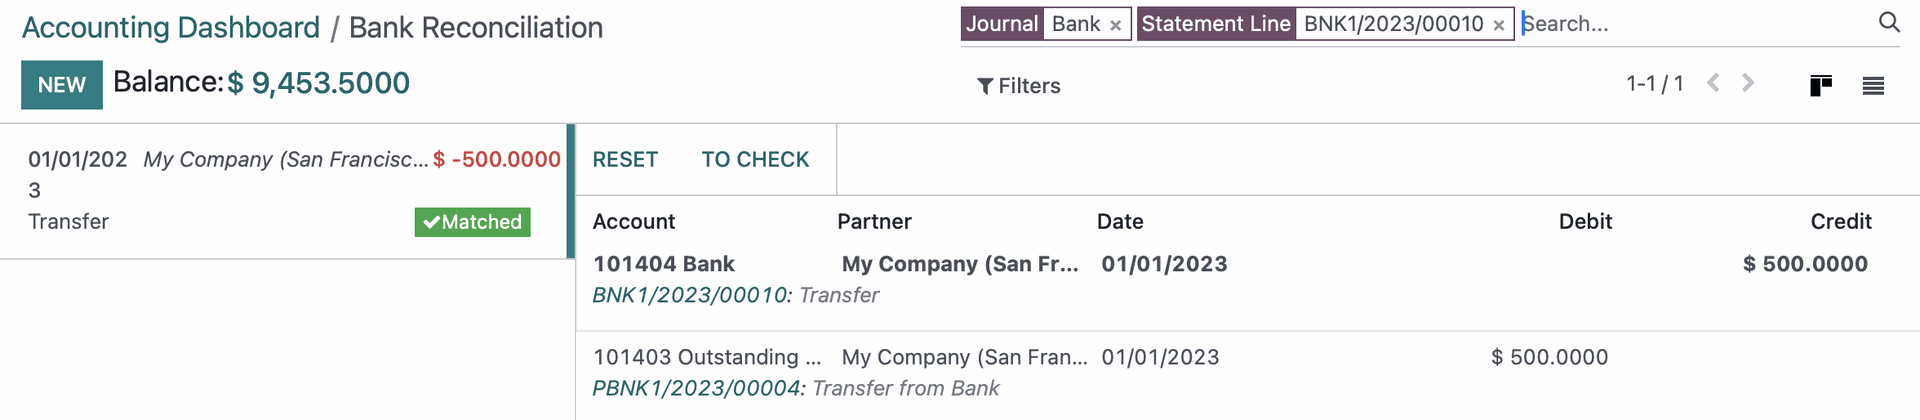 Odoo Accounting: Bank Reconciliation